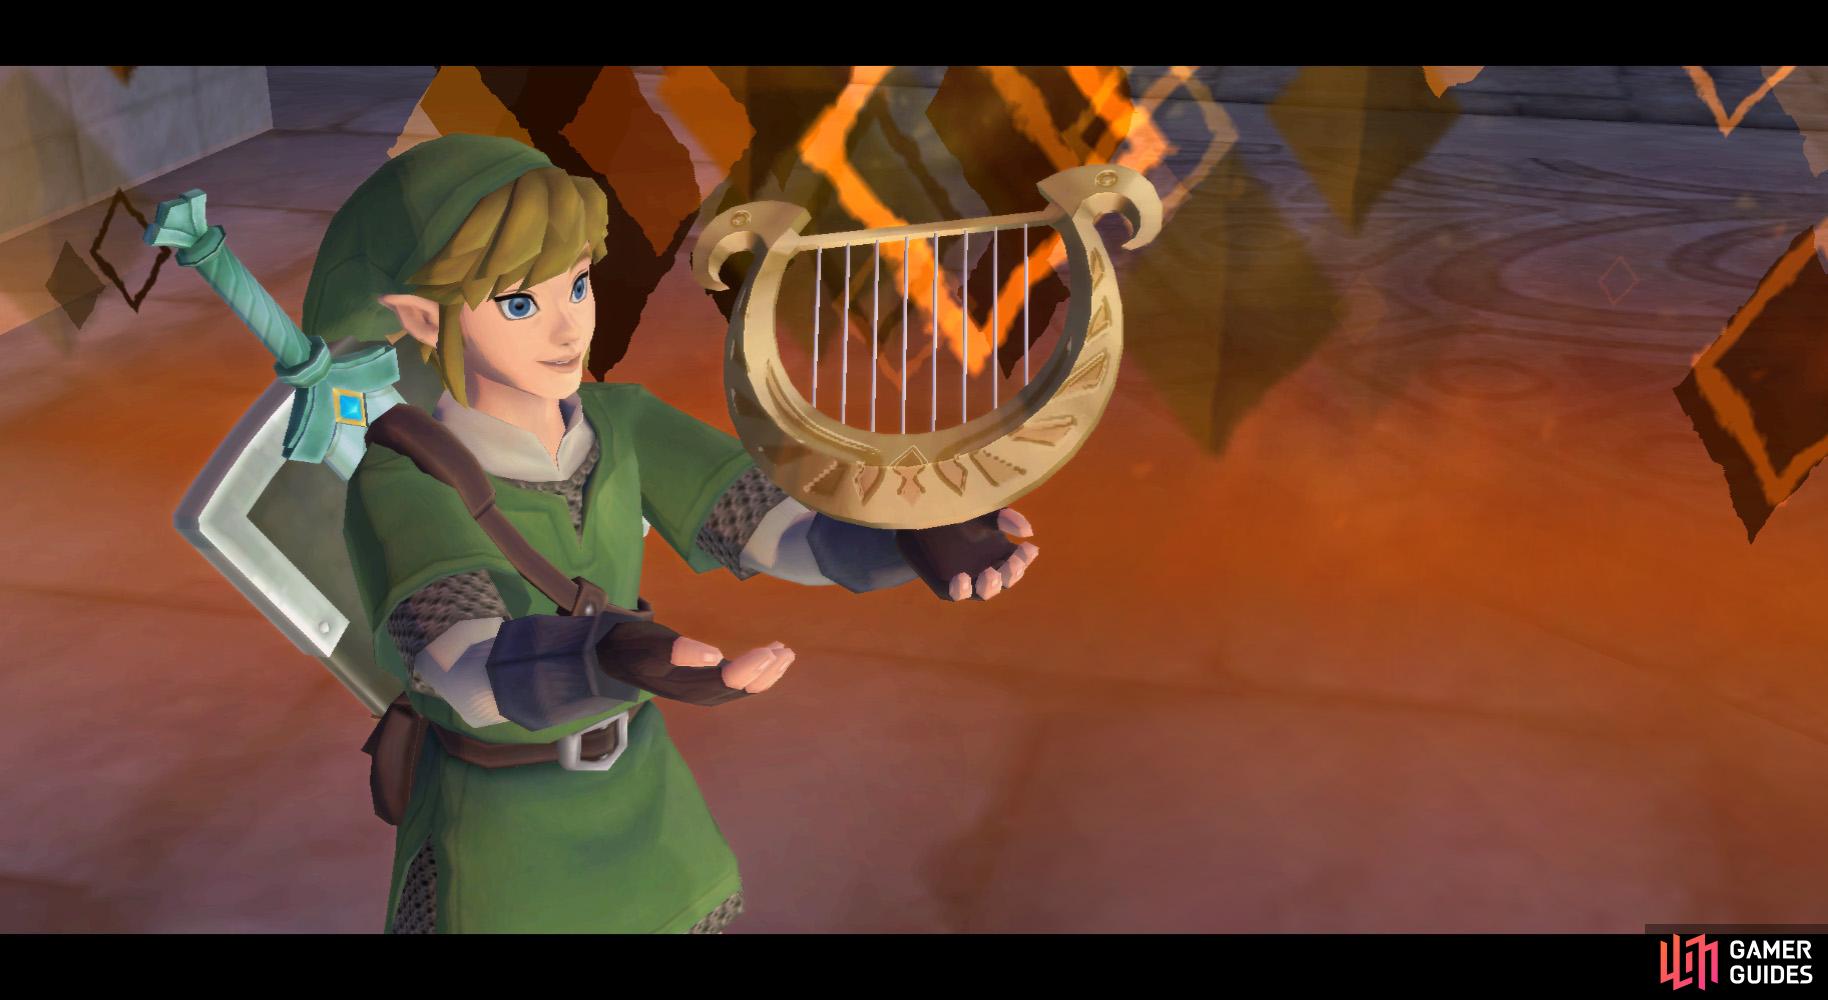 Musical instruments are very common in Zelda games.